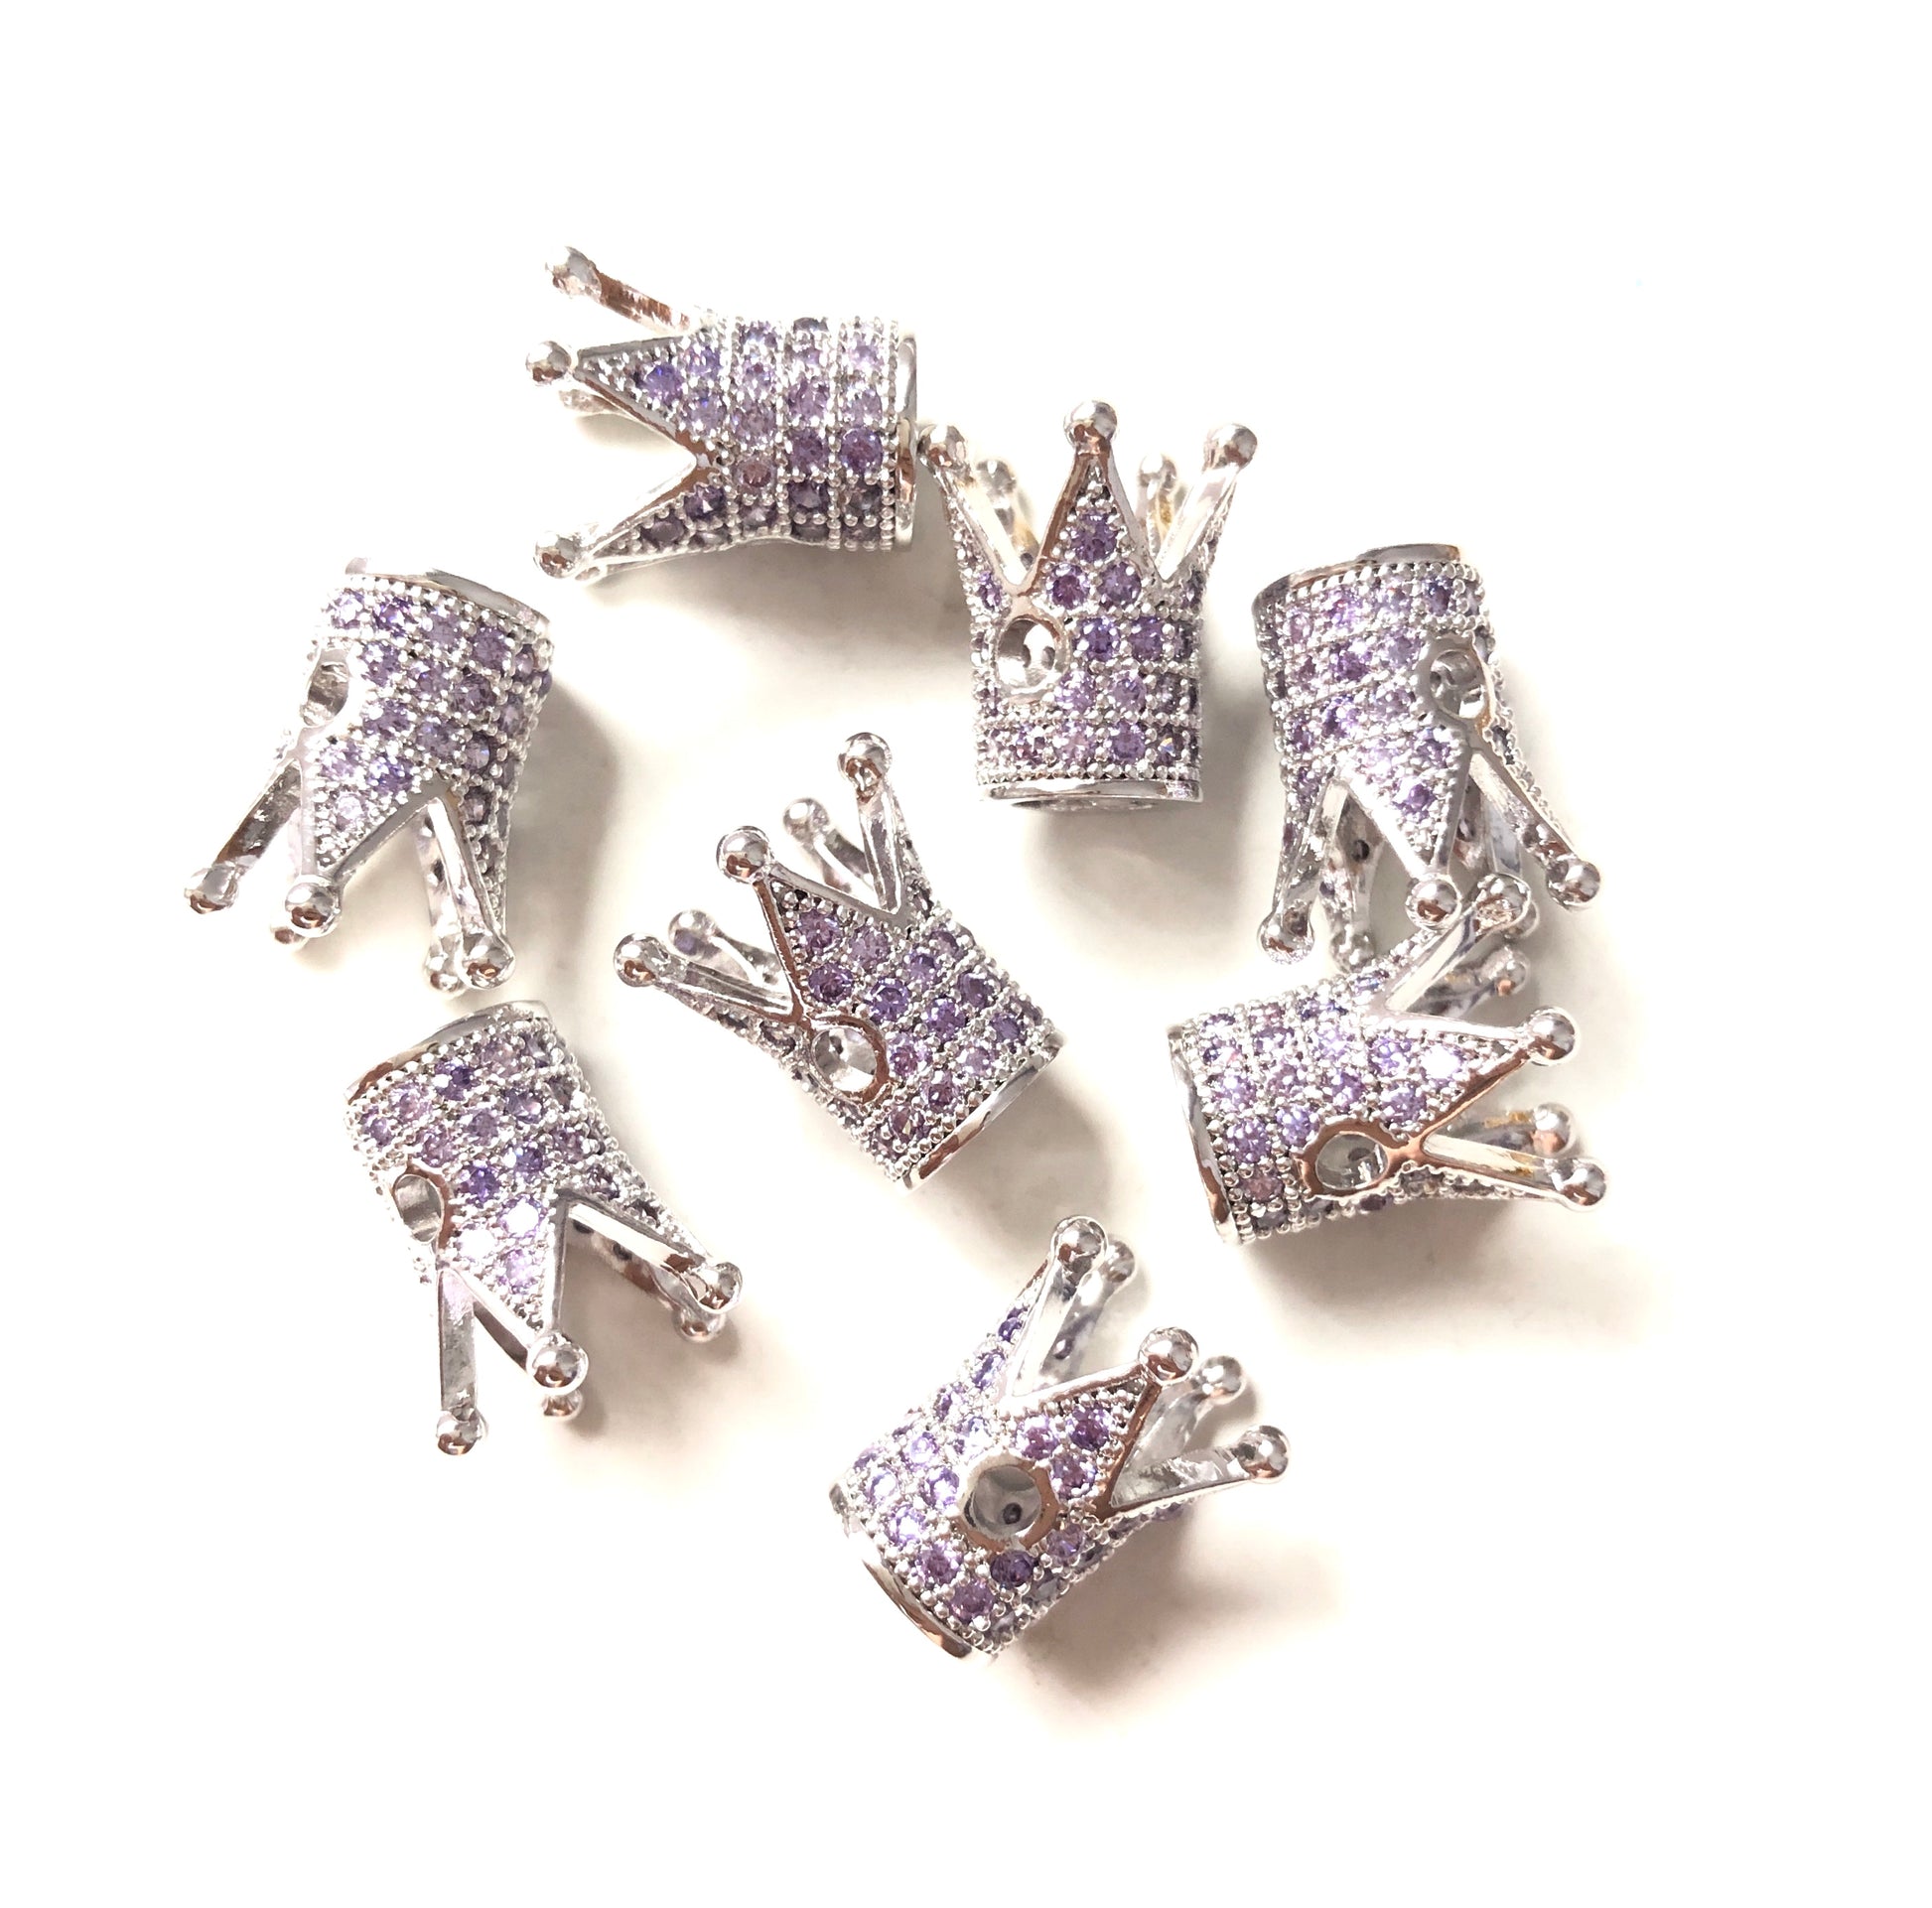 10pcs/lot Purple CZ Paved Crown Spacers Silver CZ Paved Spacers Colorful Zirconia Crown Beads Charms Beads Beyond